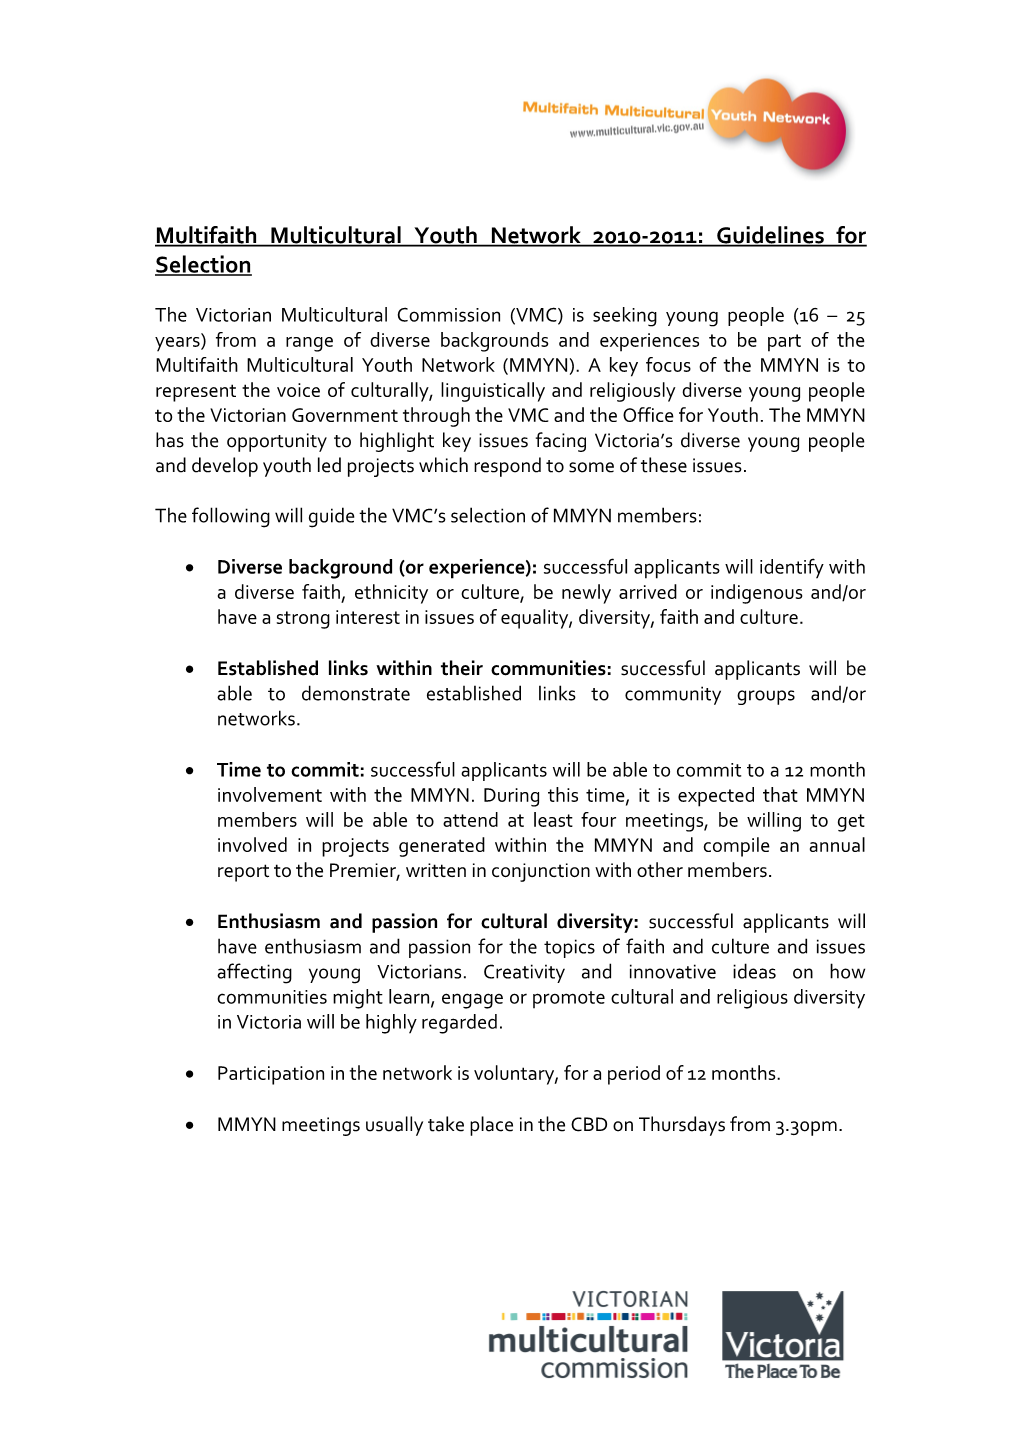 Multifaith Multicultural Youth Network 2009-2010: Guidelines for Selection